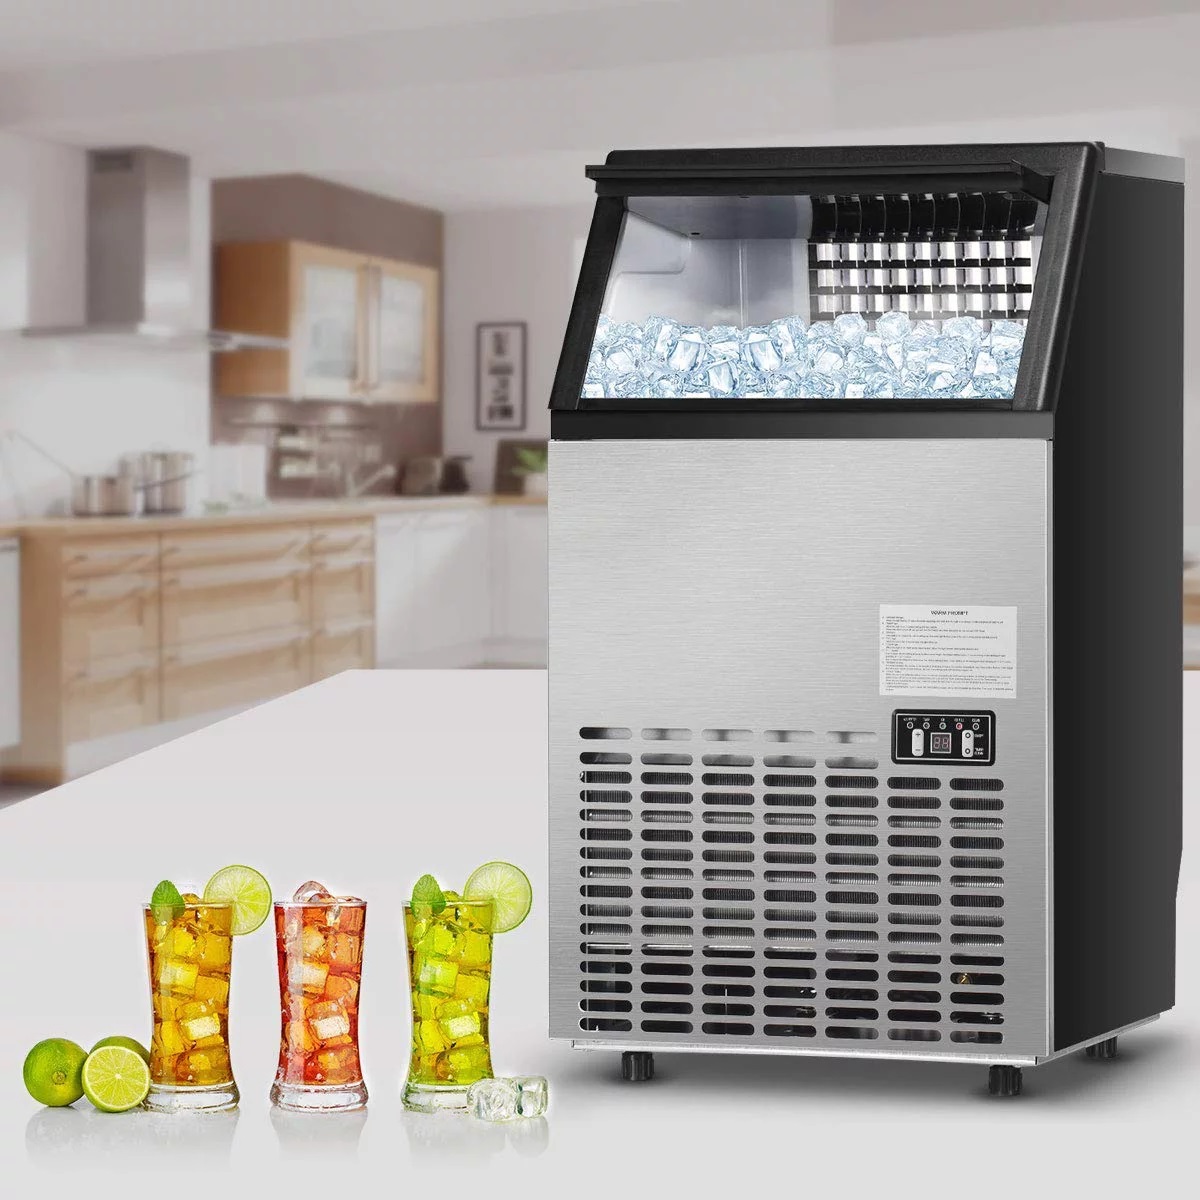 How To Clean A Commercial Ice Maker